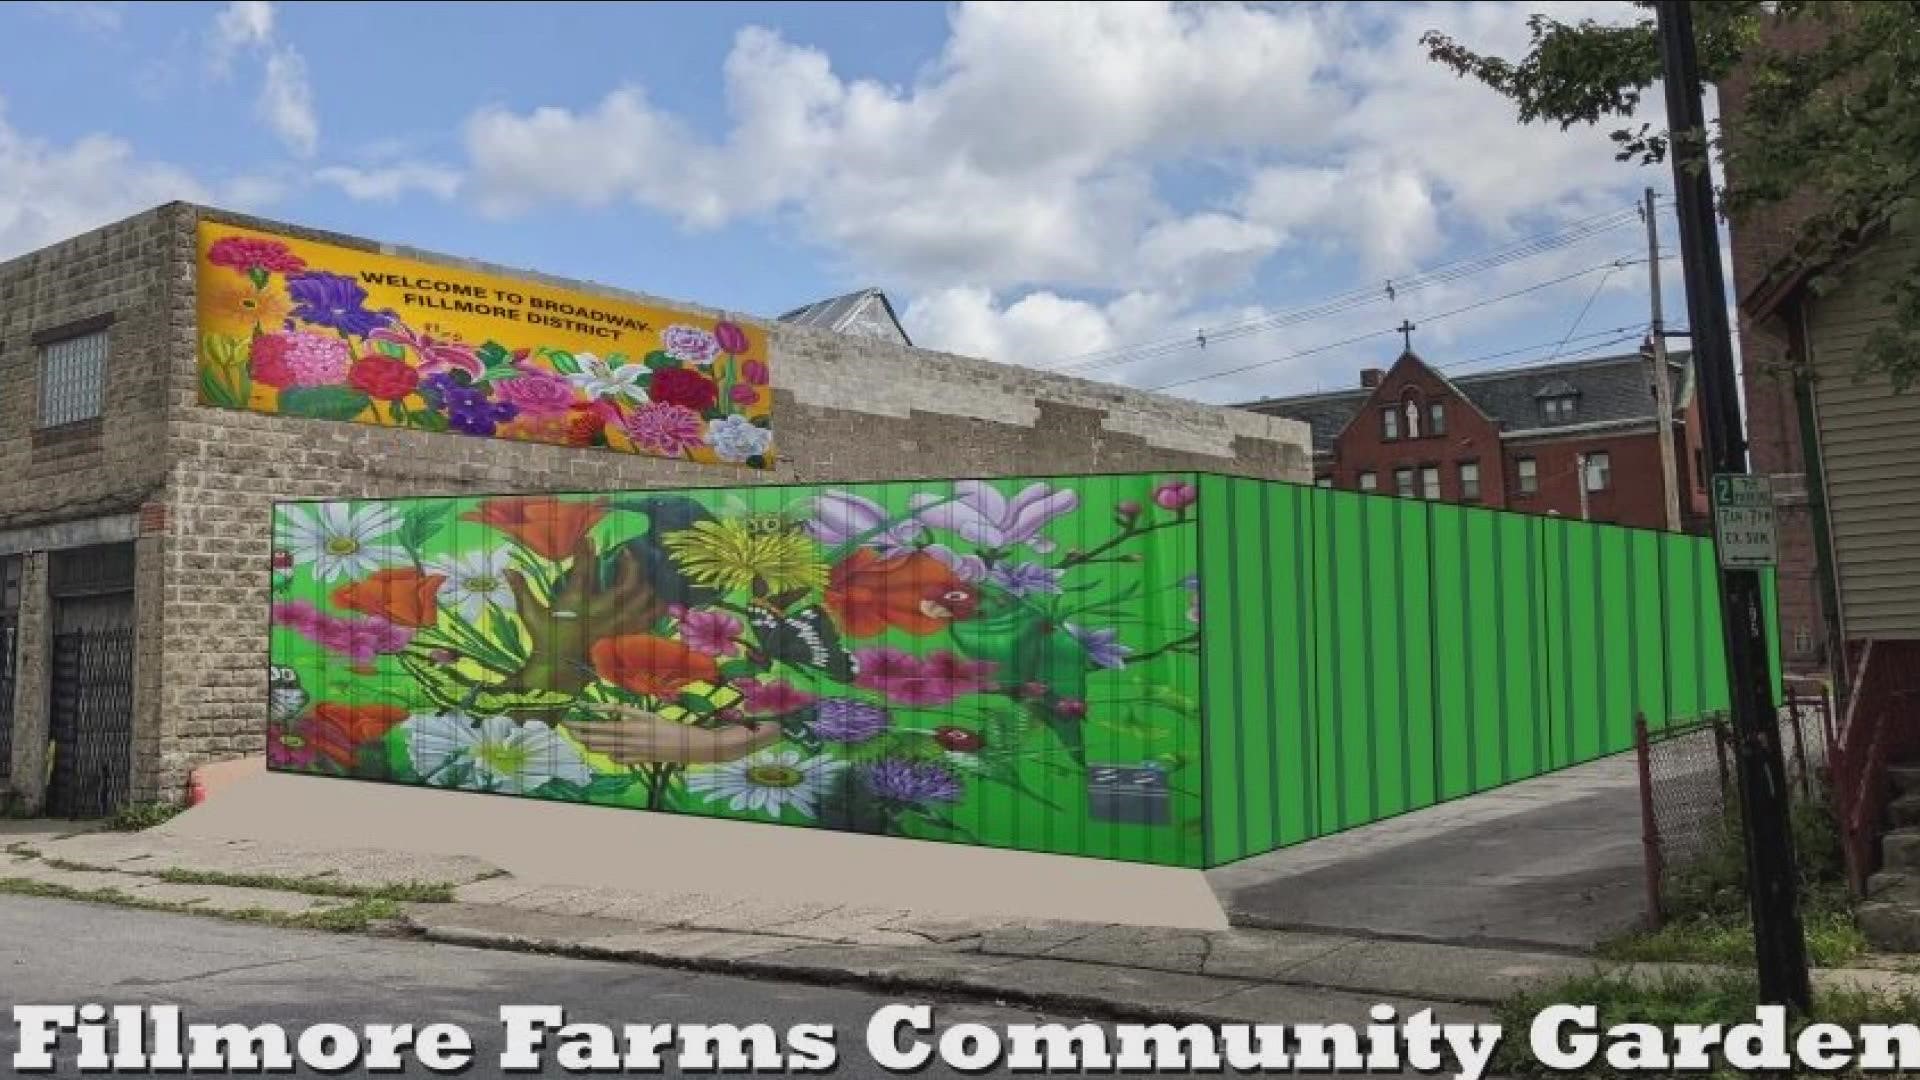 Growing food in shipping containers